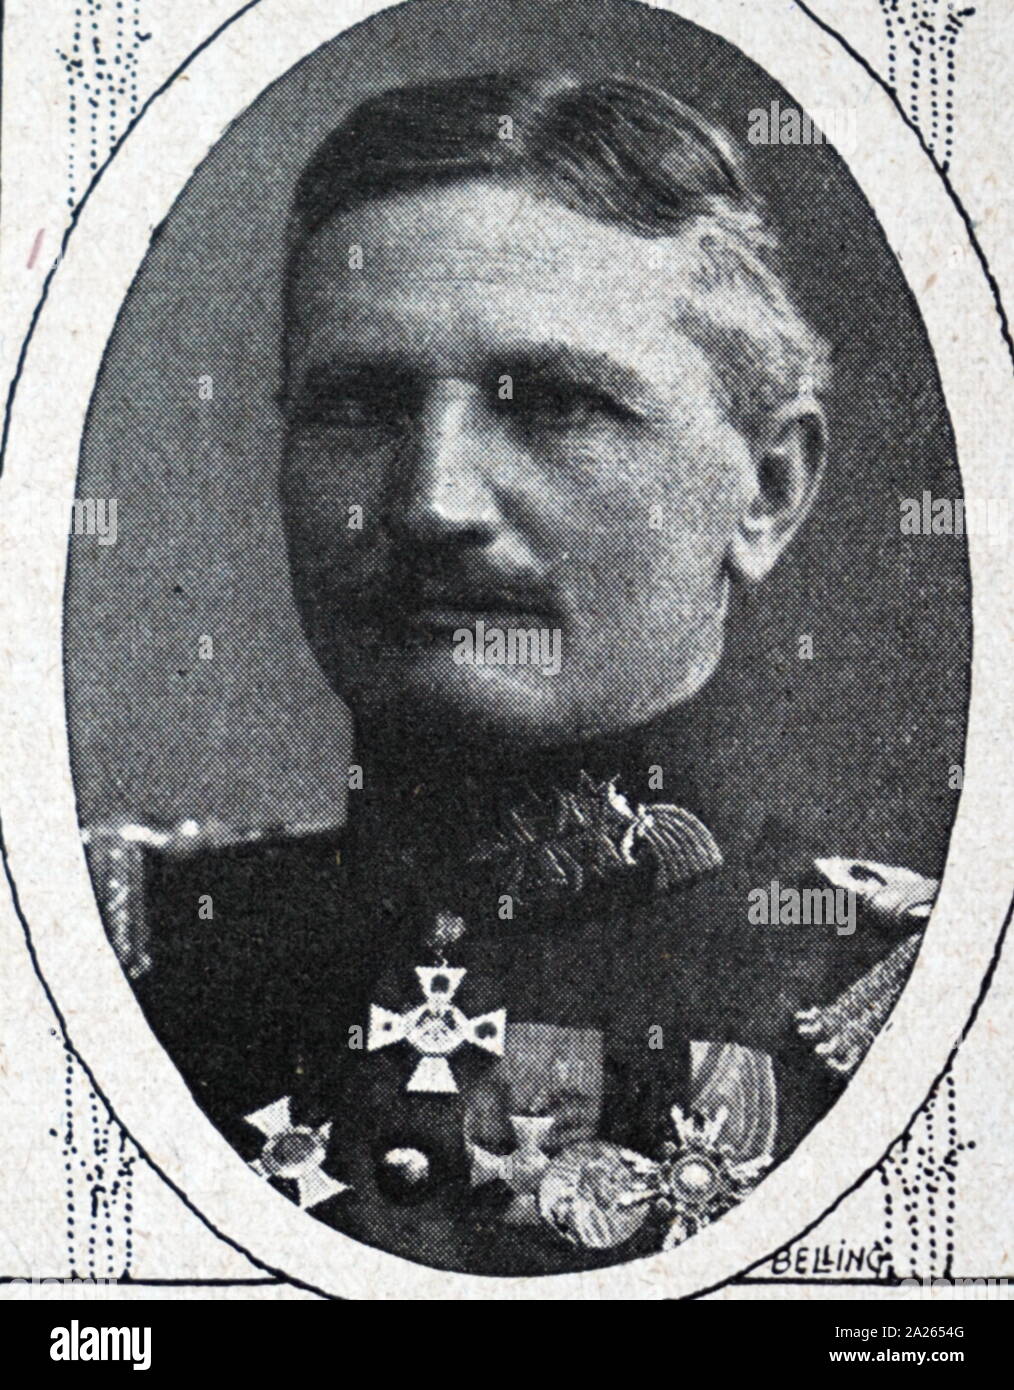 Ludwig Wilhelm Karl Von Lauter, (1855 - 1929), Prussian general of artillery and inspector general of foot artillery and commander and later chief of the Schleswig-Holstein Foot Artillery Regiment no. 9th 1913 Lauter was raised on the occasion of the 25th anniversary of the reign of Kaiser Wilhelm II in the hereditary Prussian nobility. During the First World War, he was until 1917 General of foot artillery in the Great Headquarters. Stock Photo